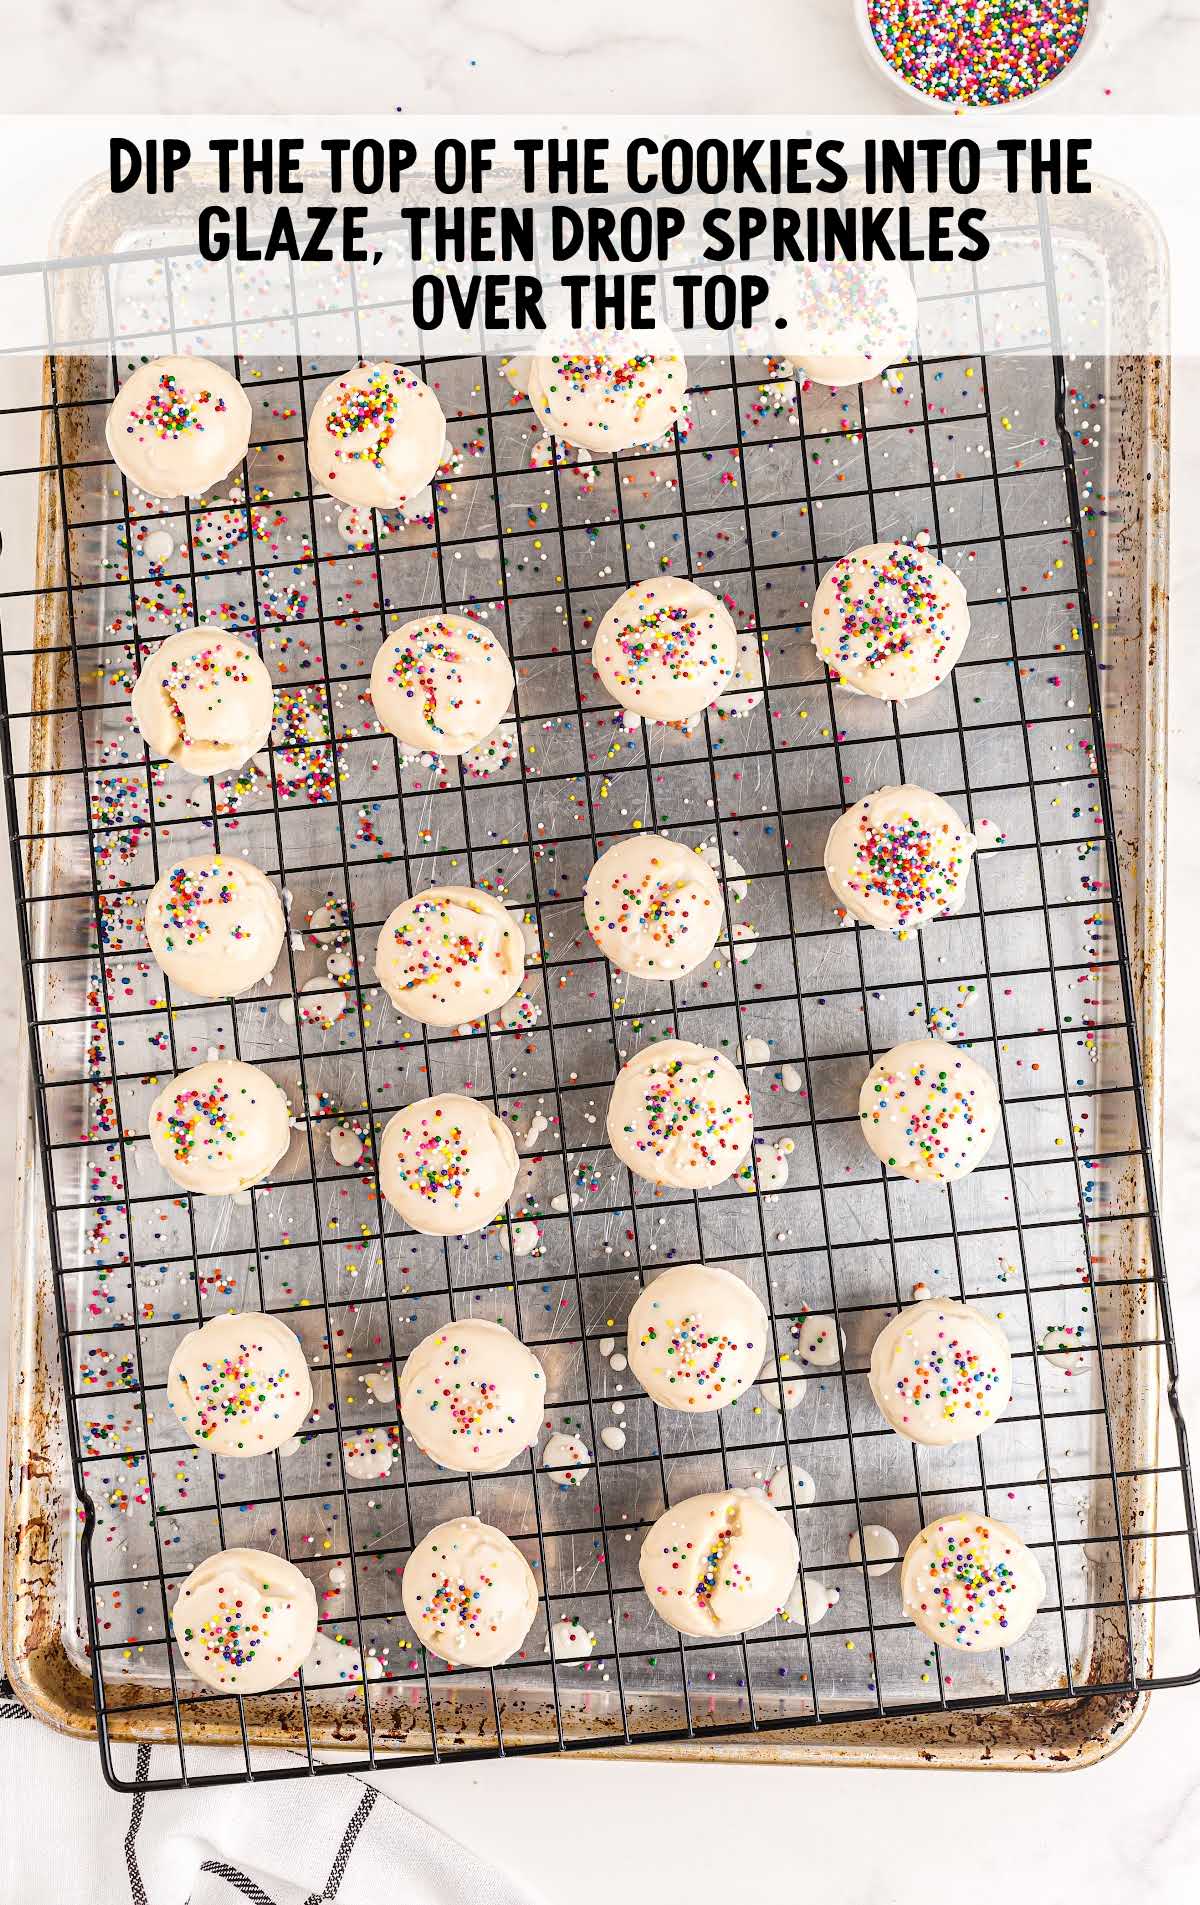 dip the cookies into the glaze and drop sprinkles